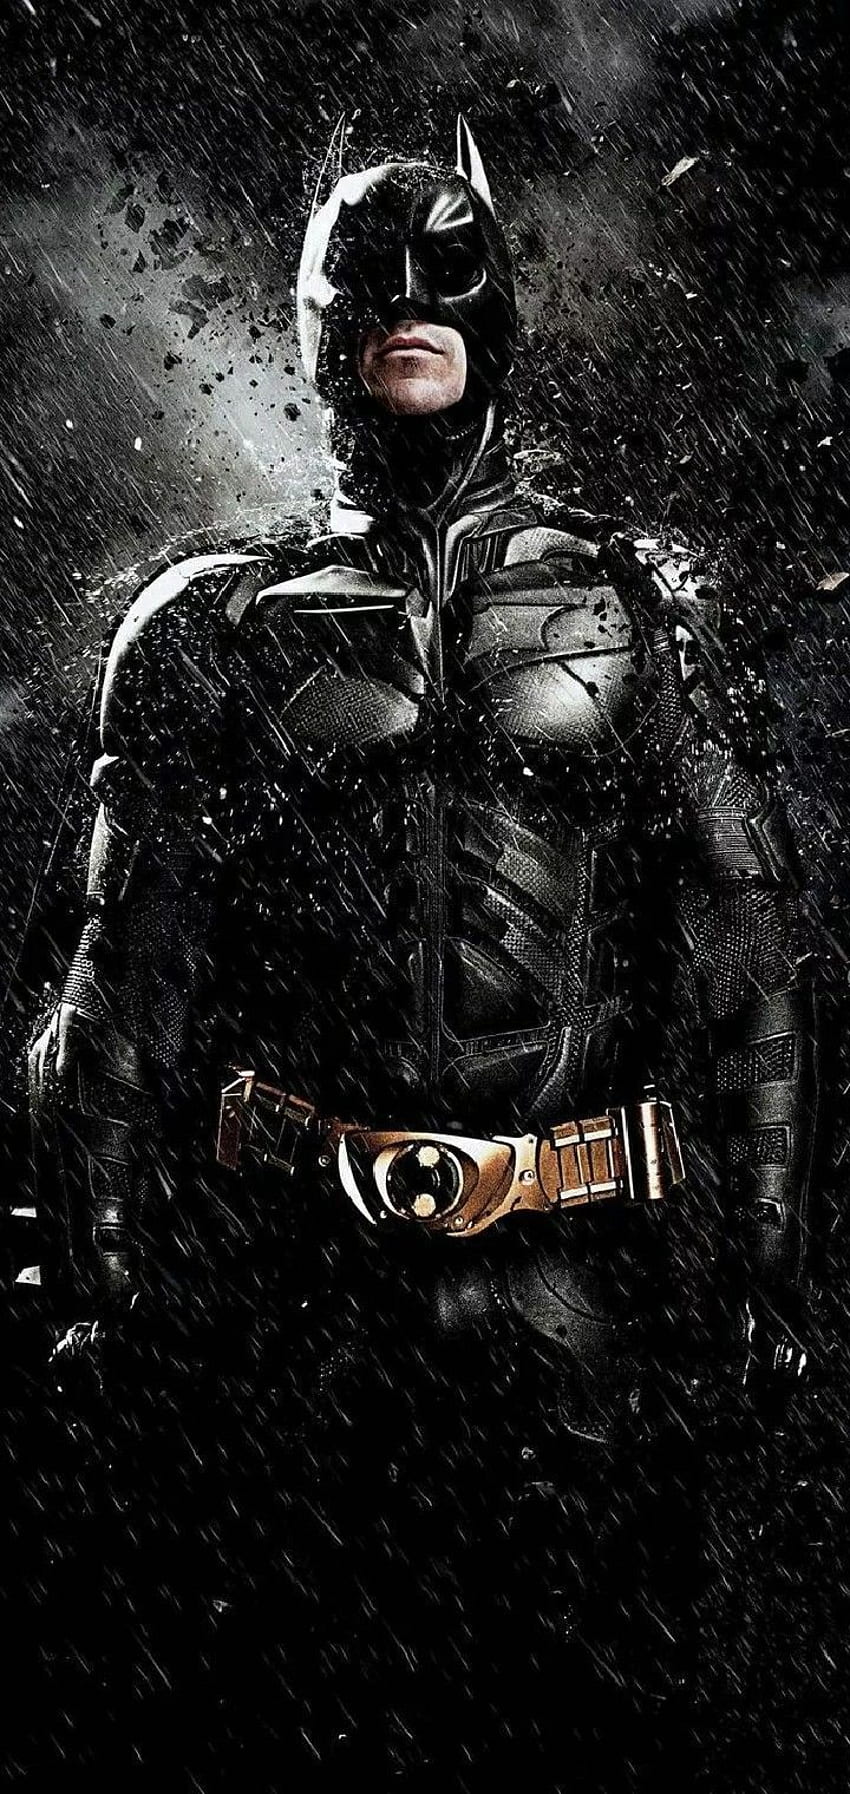 Batman 4K Ultra HD Wallpapers For Android in 2023